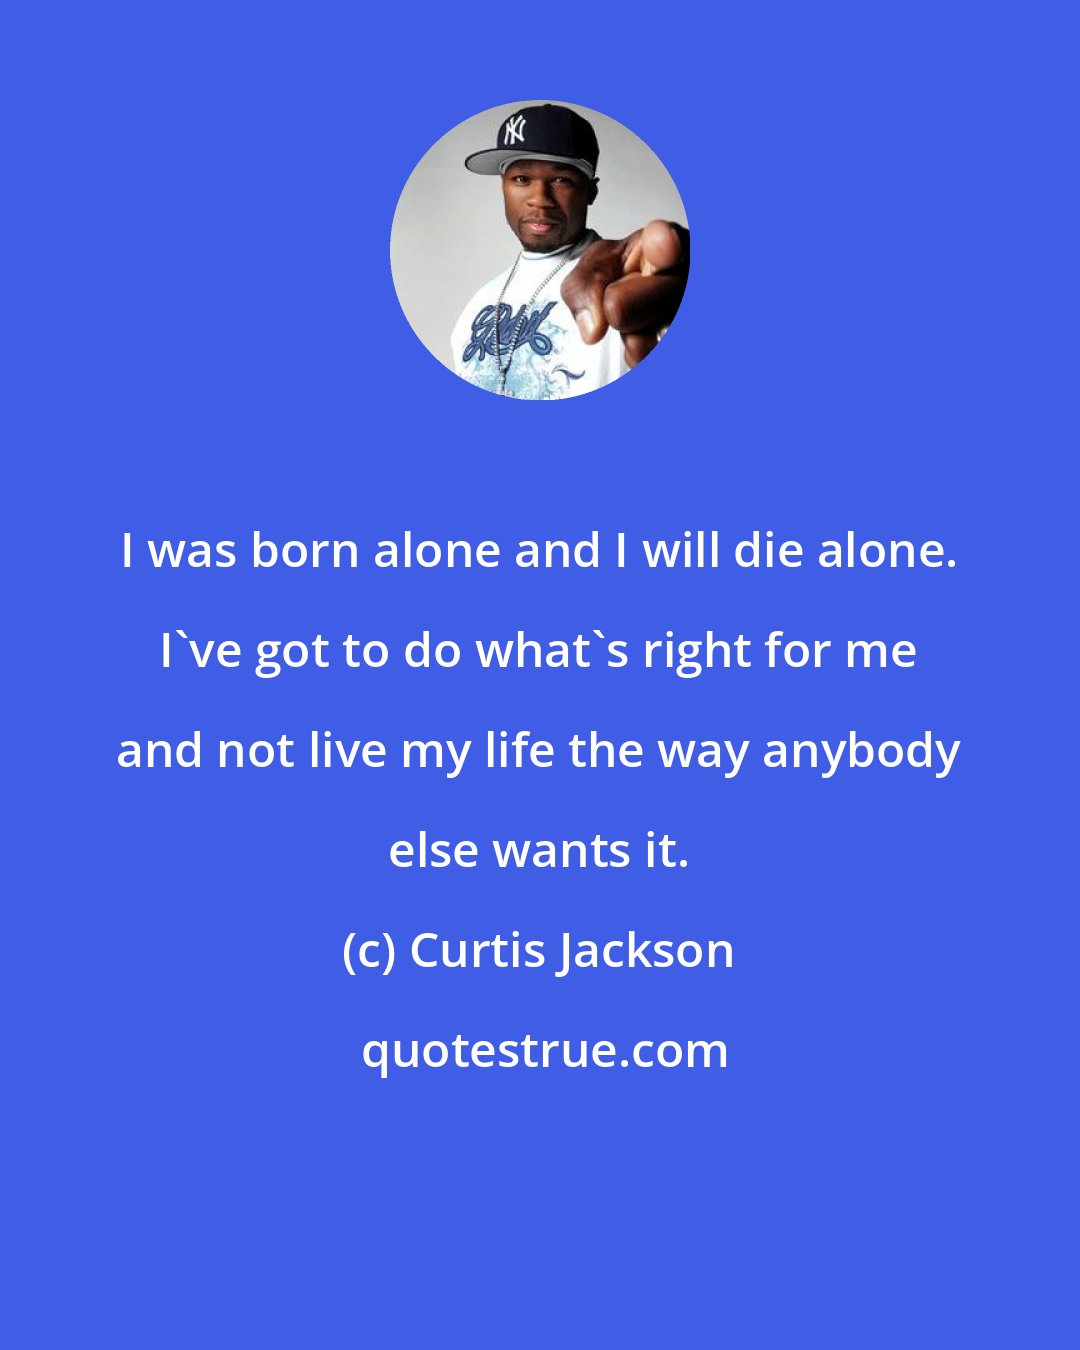 Curtis Jackson: I was born alone and I will die alone. I've got to do what's right for me and not live my life the way anybody else wants it.